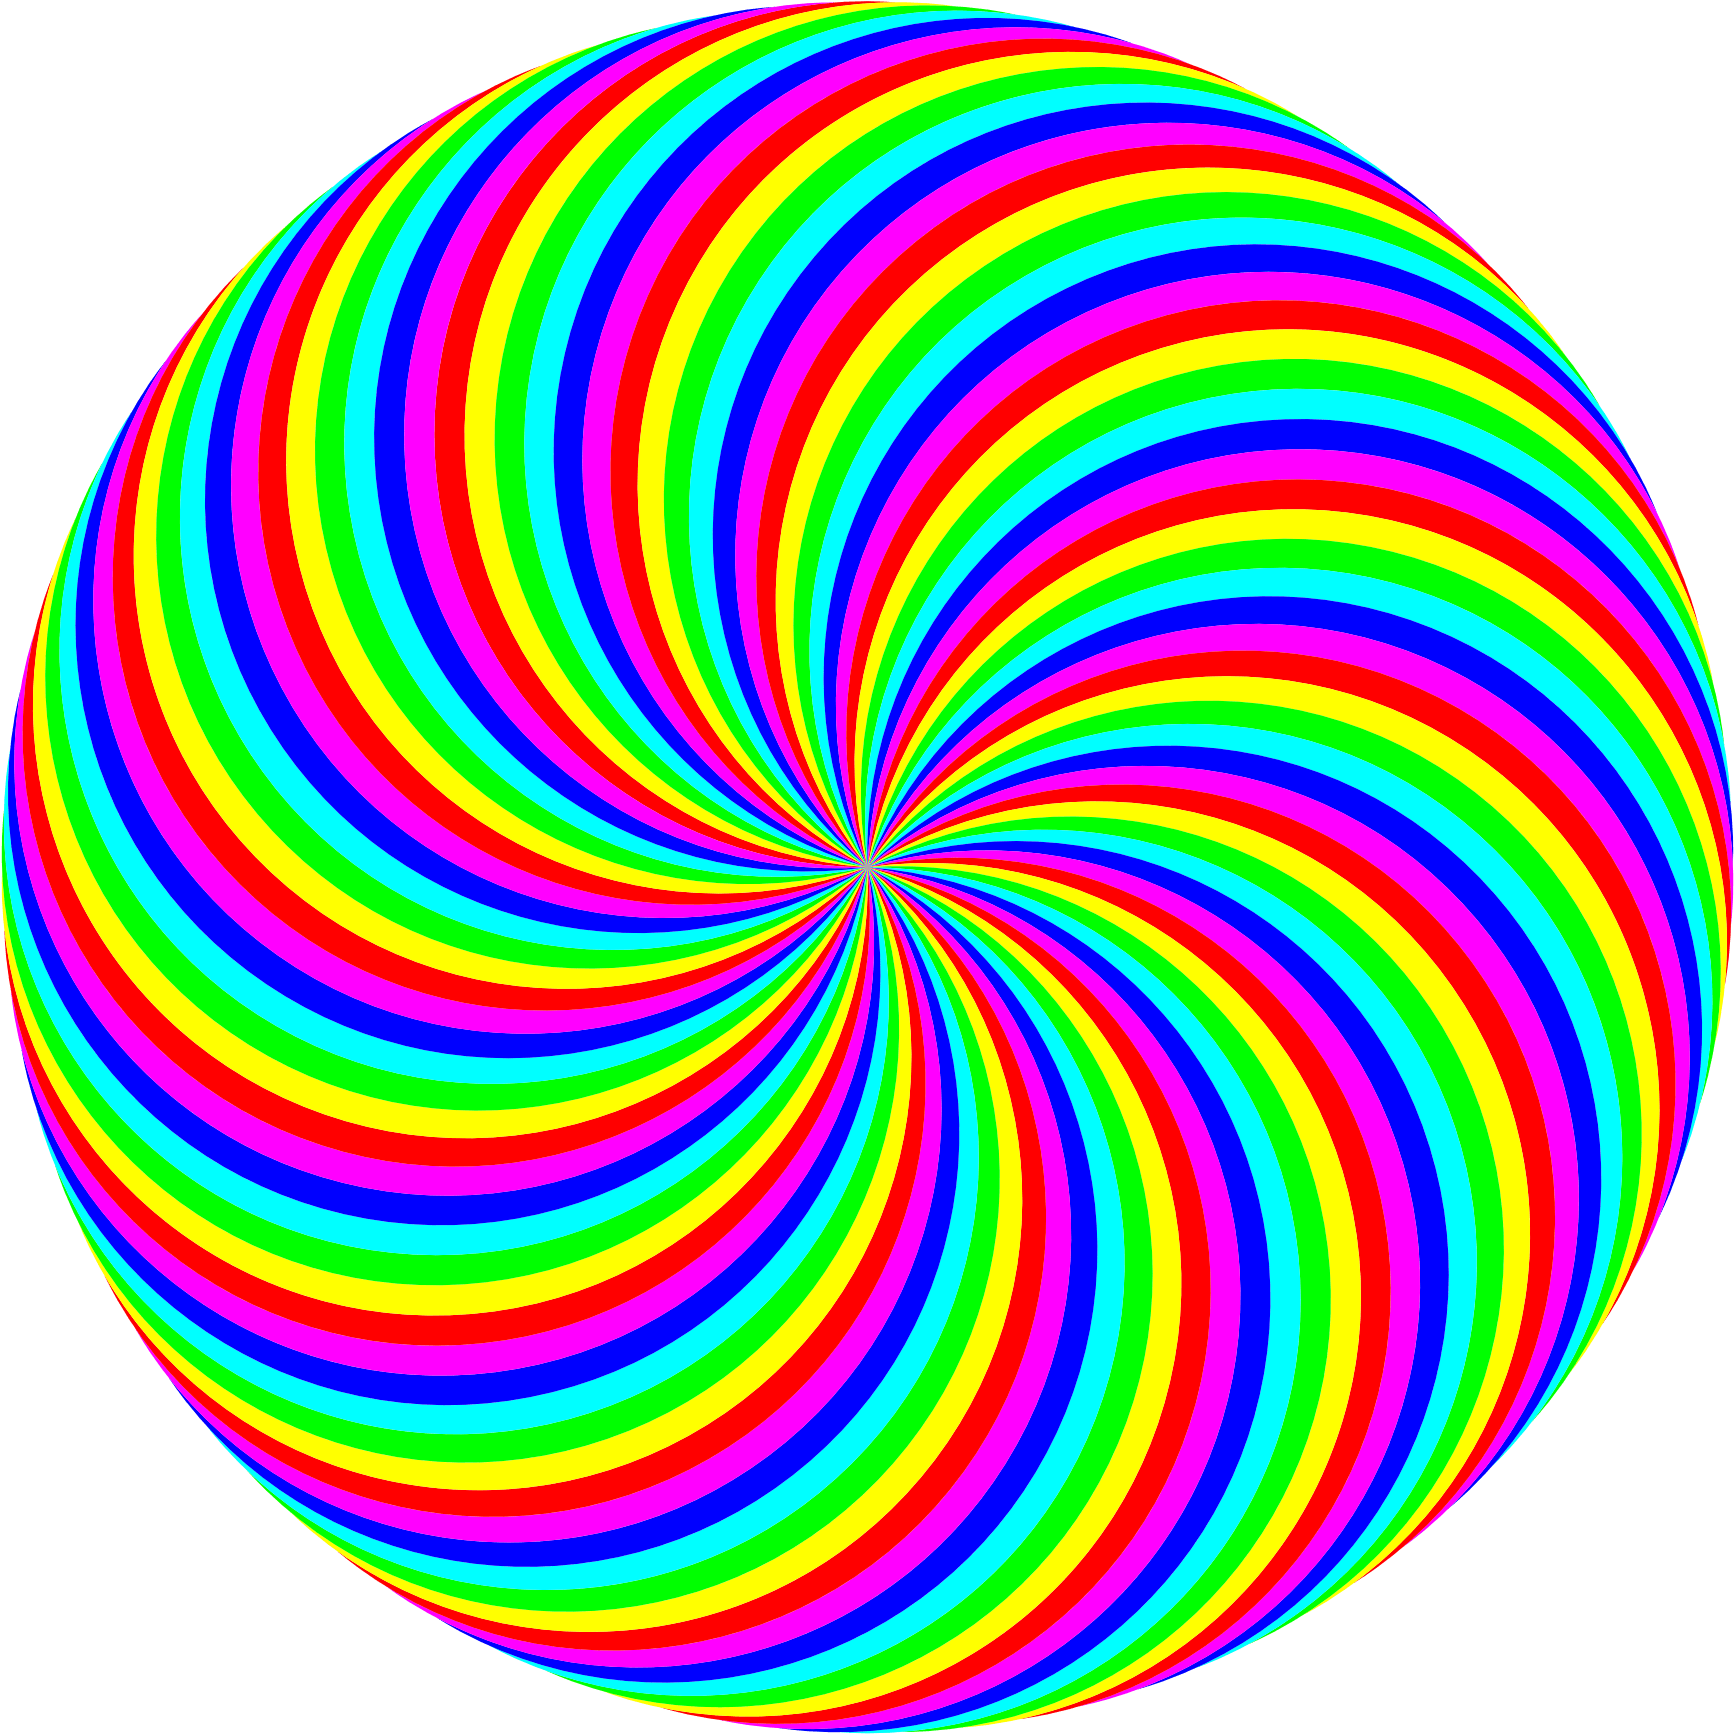 90 Circle Swirl 6 Color By 10binary On Deviantart - Spin Your Phone To See (1979x1979)